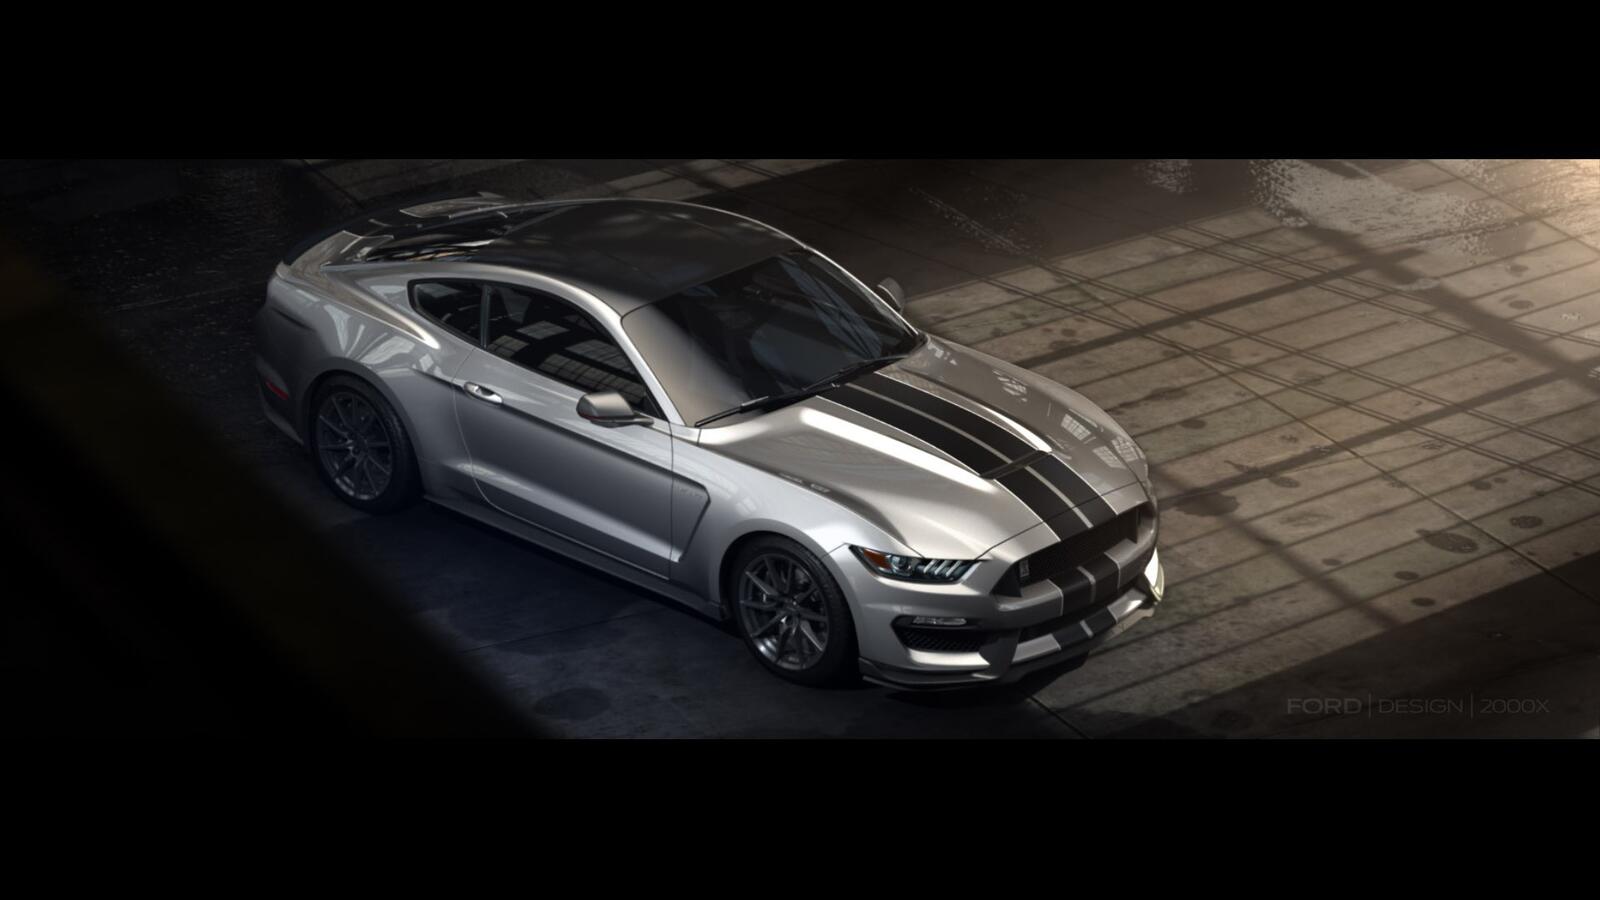 Wallpapers car Ford Mustang Shelby sports car on the desktop